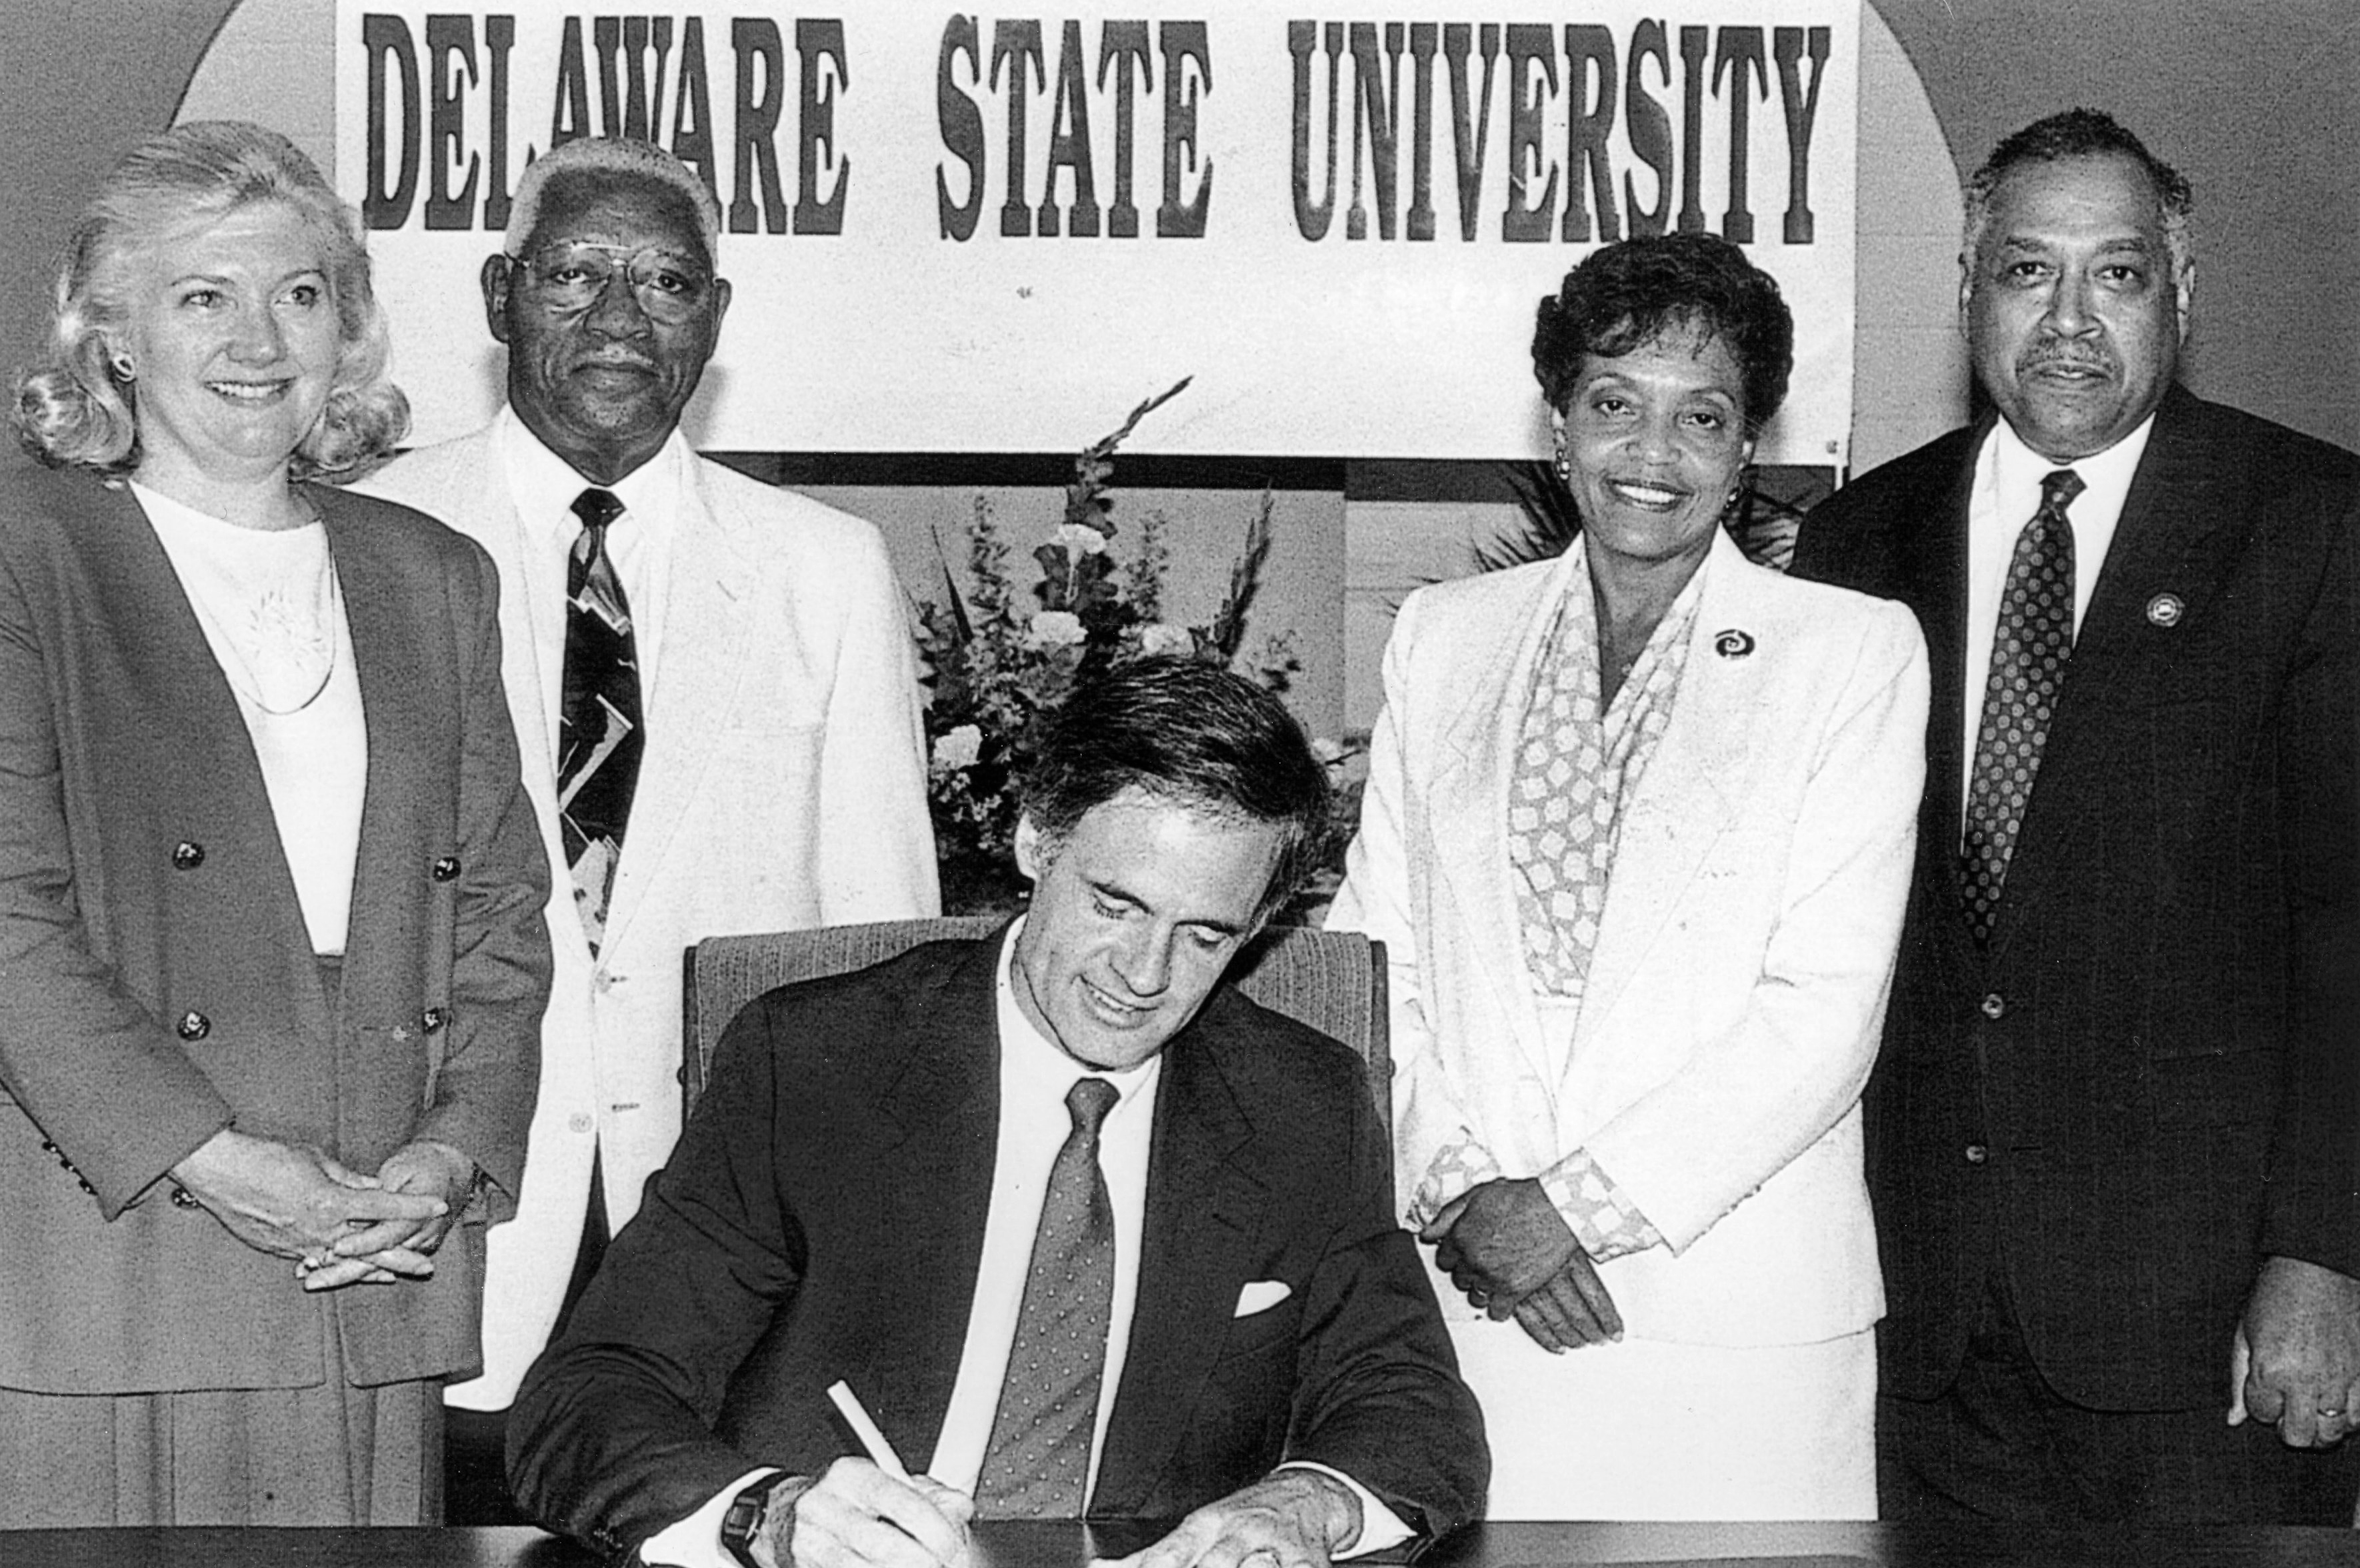 On July 1, 1993, Gov. Tom Carper signs Senate Bill 138, which changed Delaware State College to Delaware State University. Looking on, from left, are Representative Nancy Wagner, Senator Herman Holloway Sr., Vermell DeLauder and President William B. DeLauder.